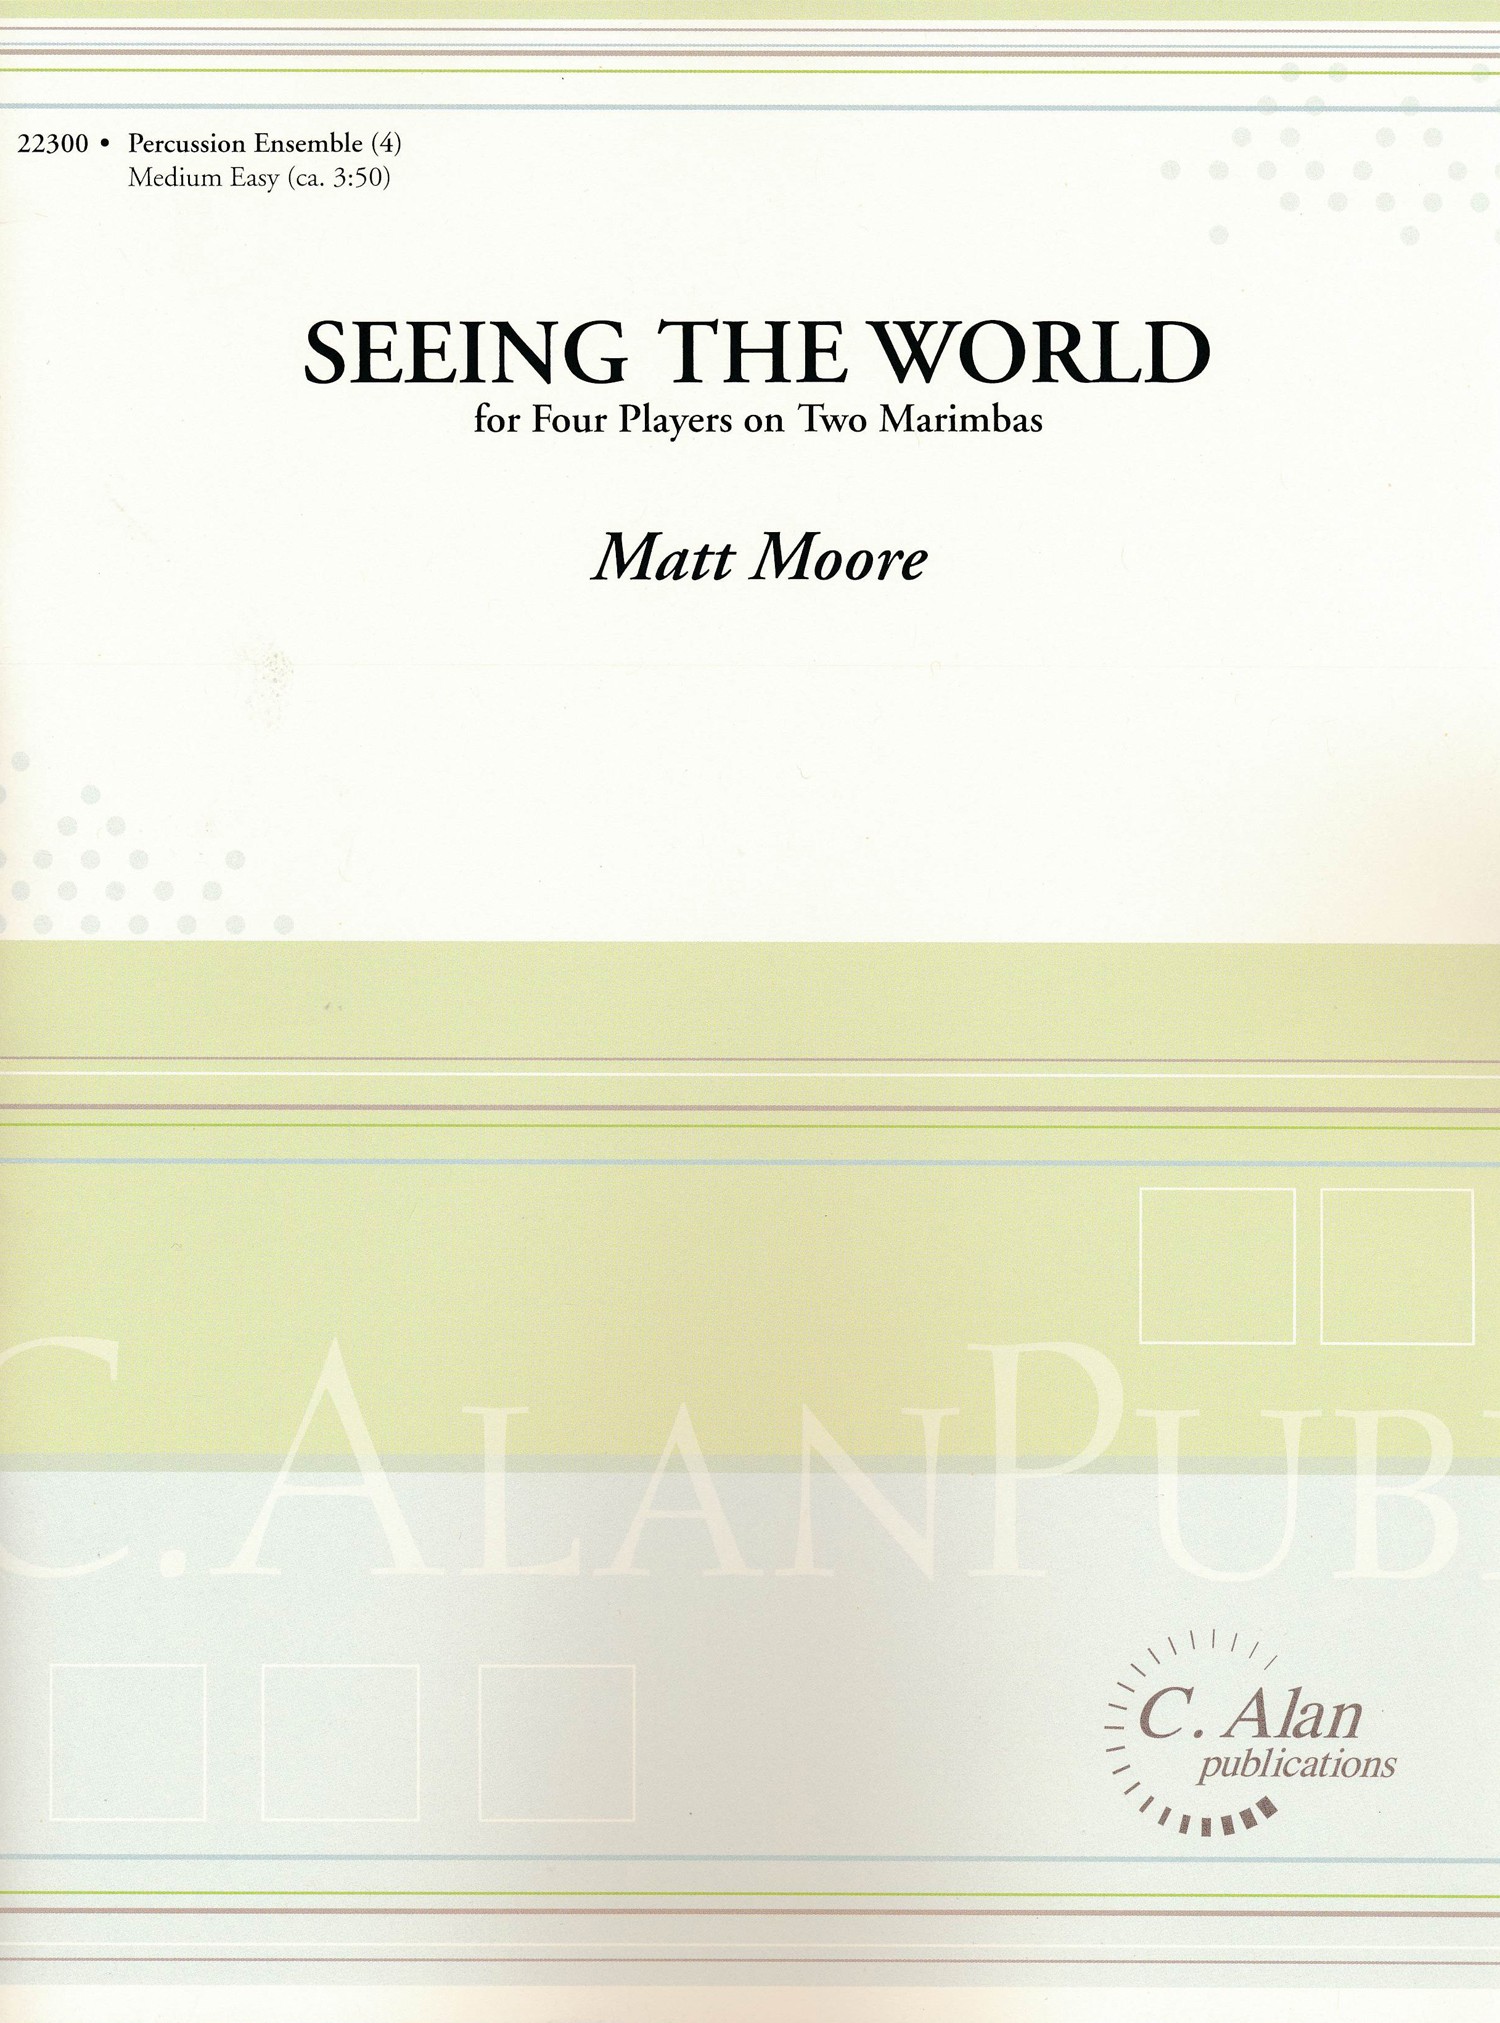 Seeing the World by Matthew Moore